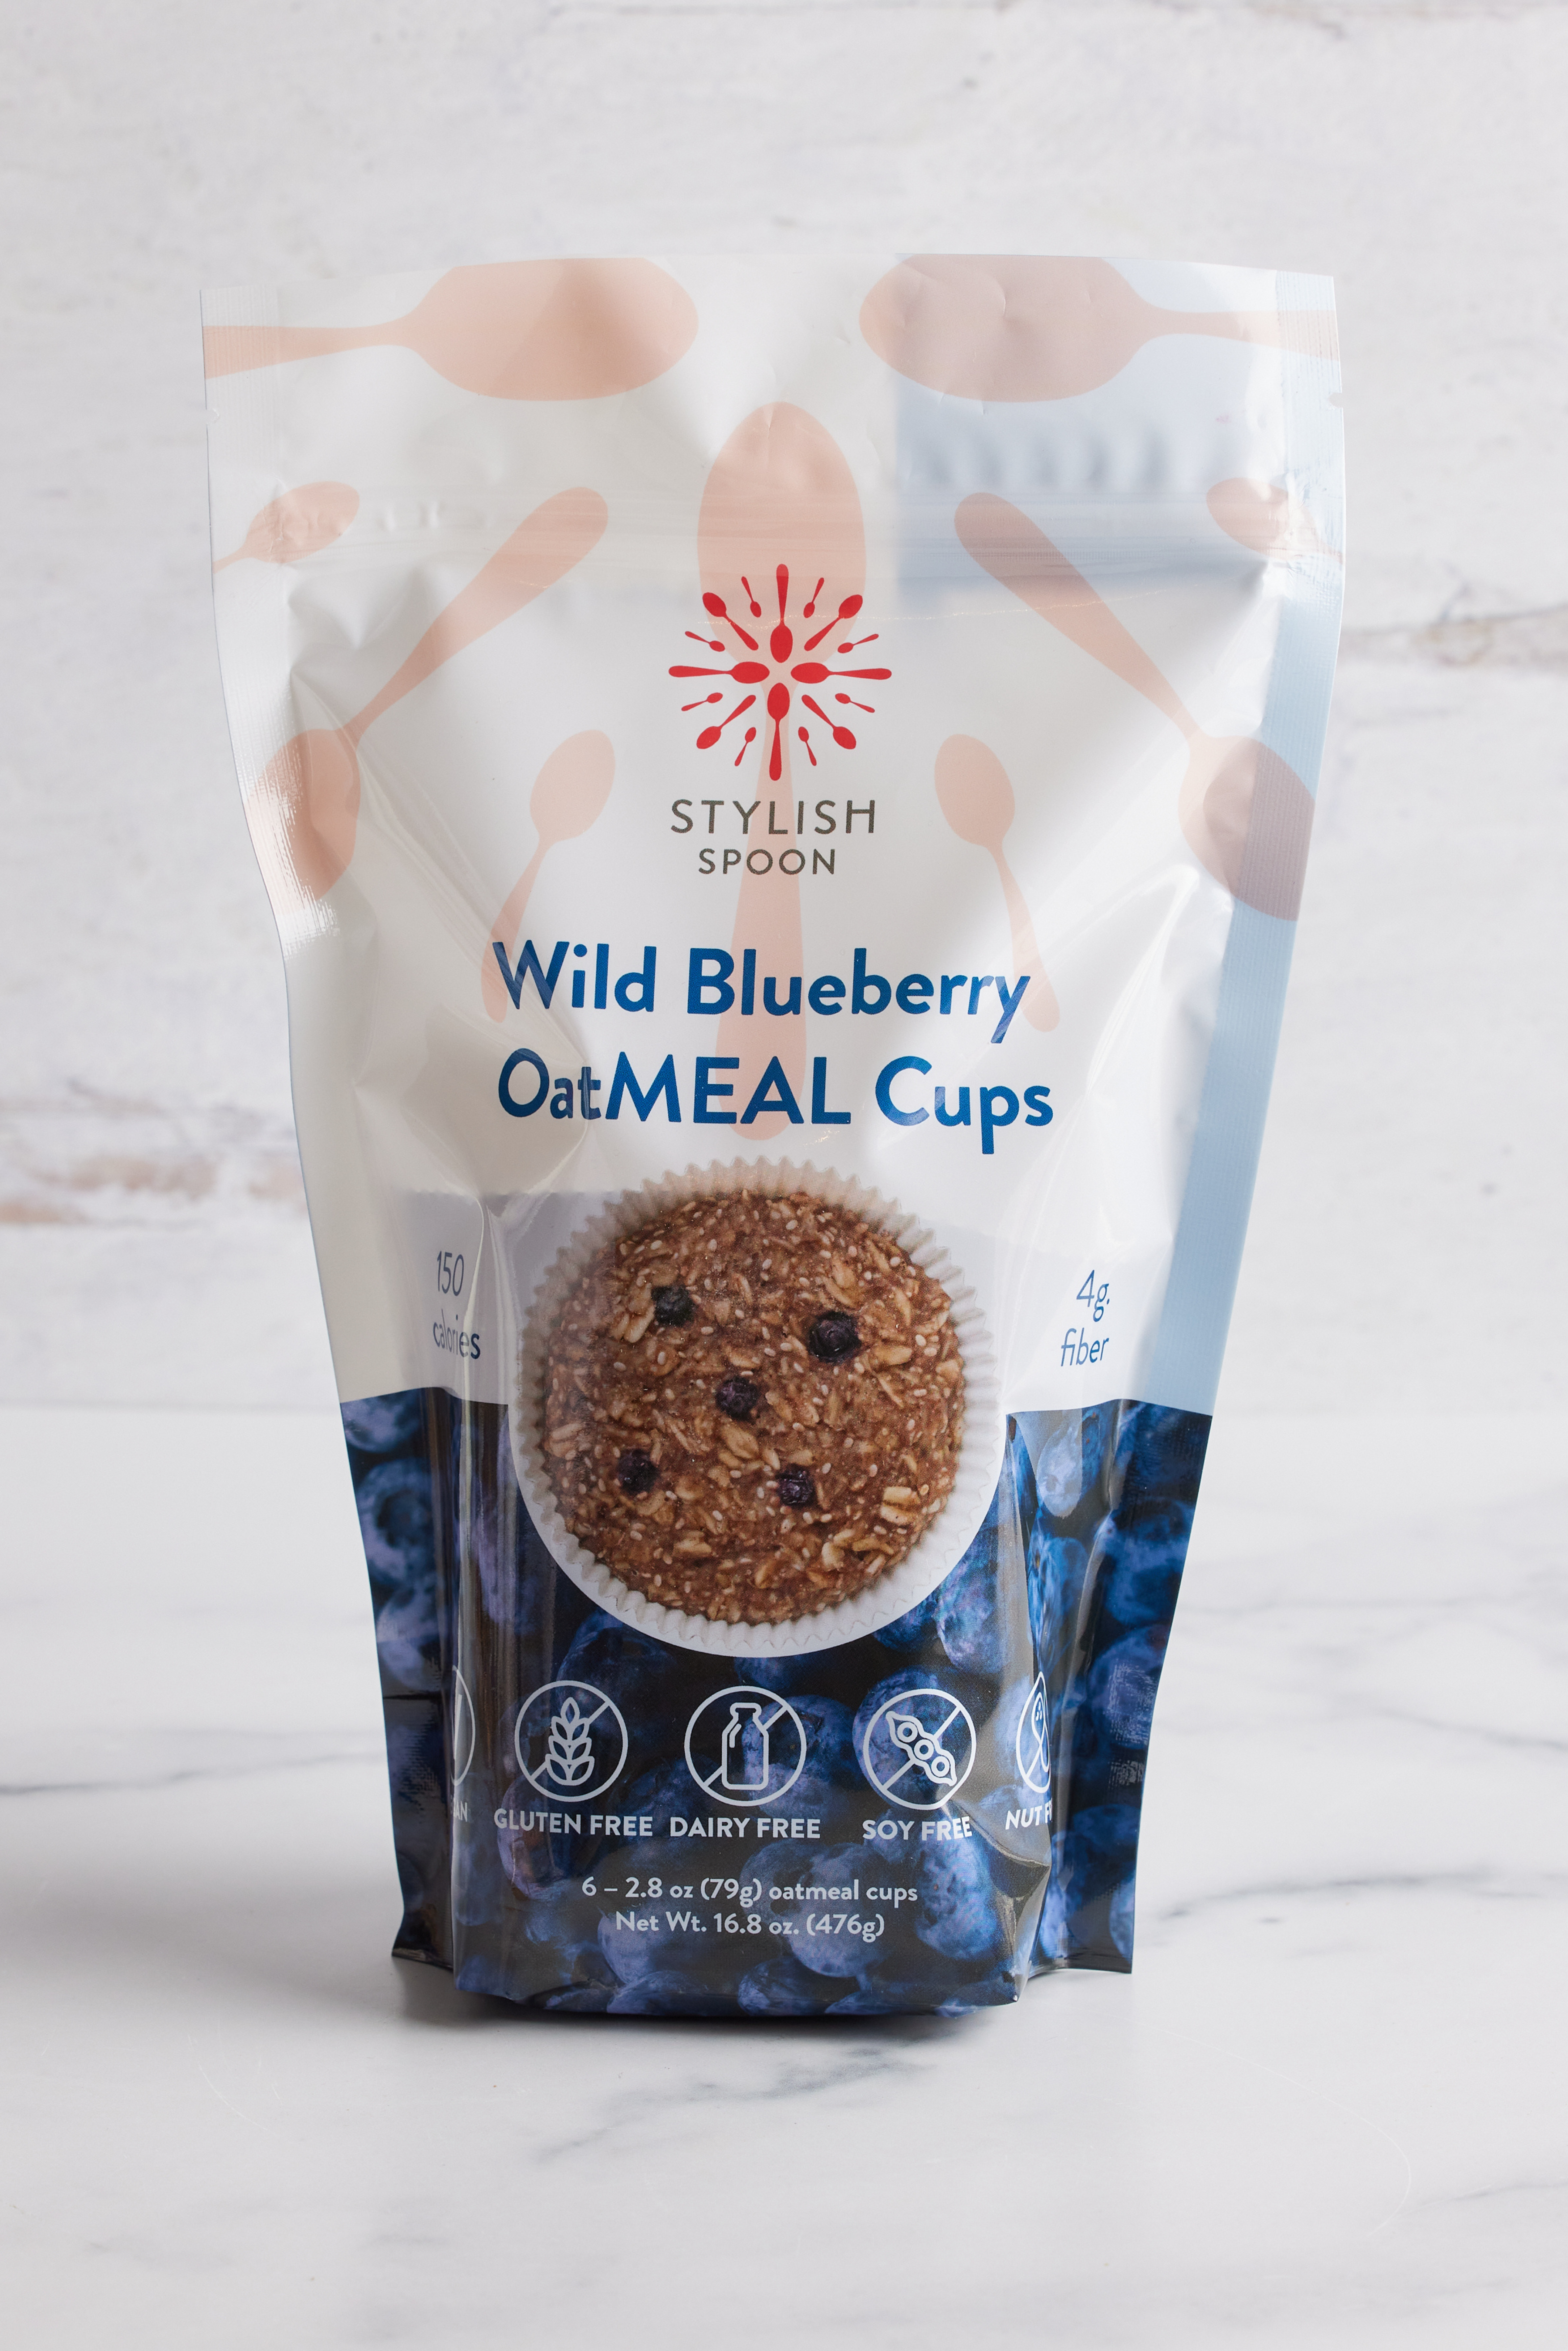 Wild Blueberry OatMEAL Cups